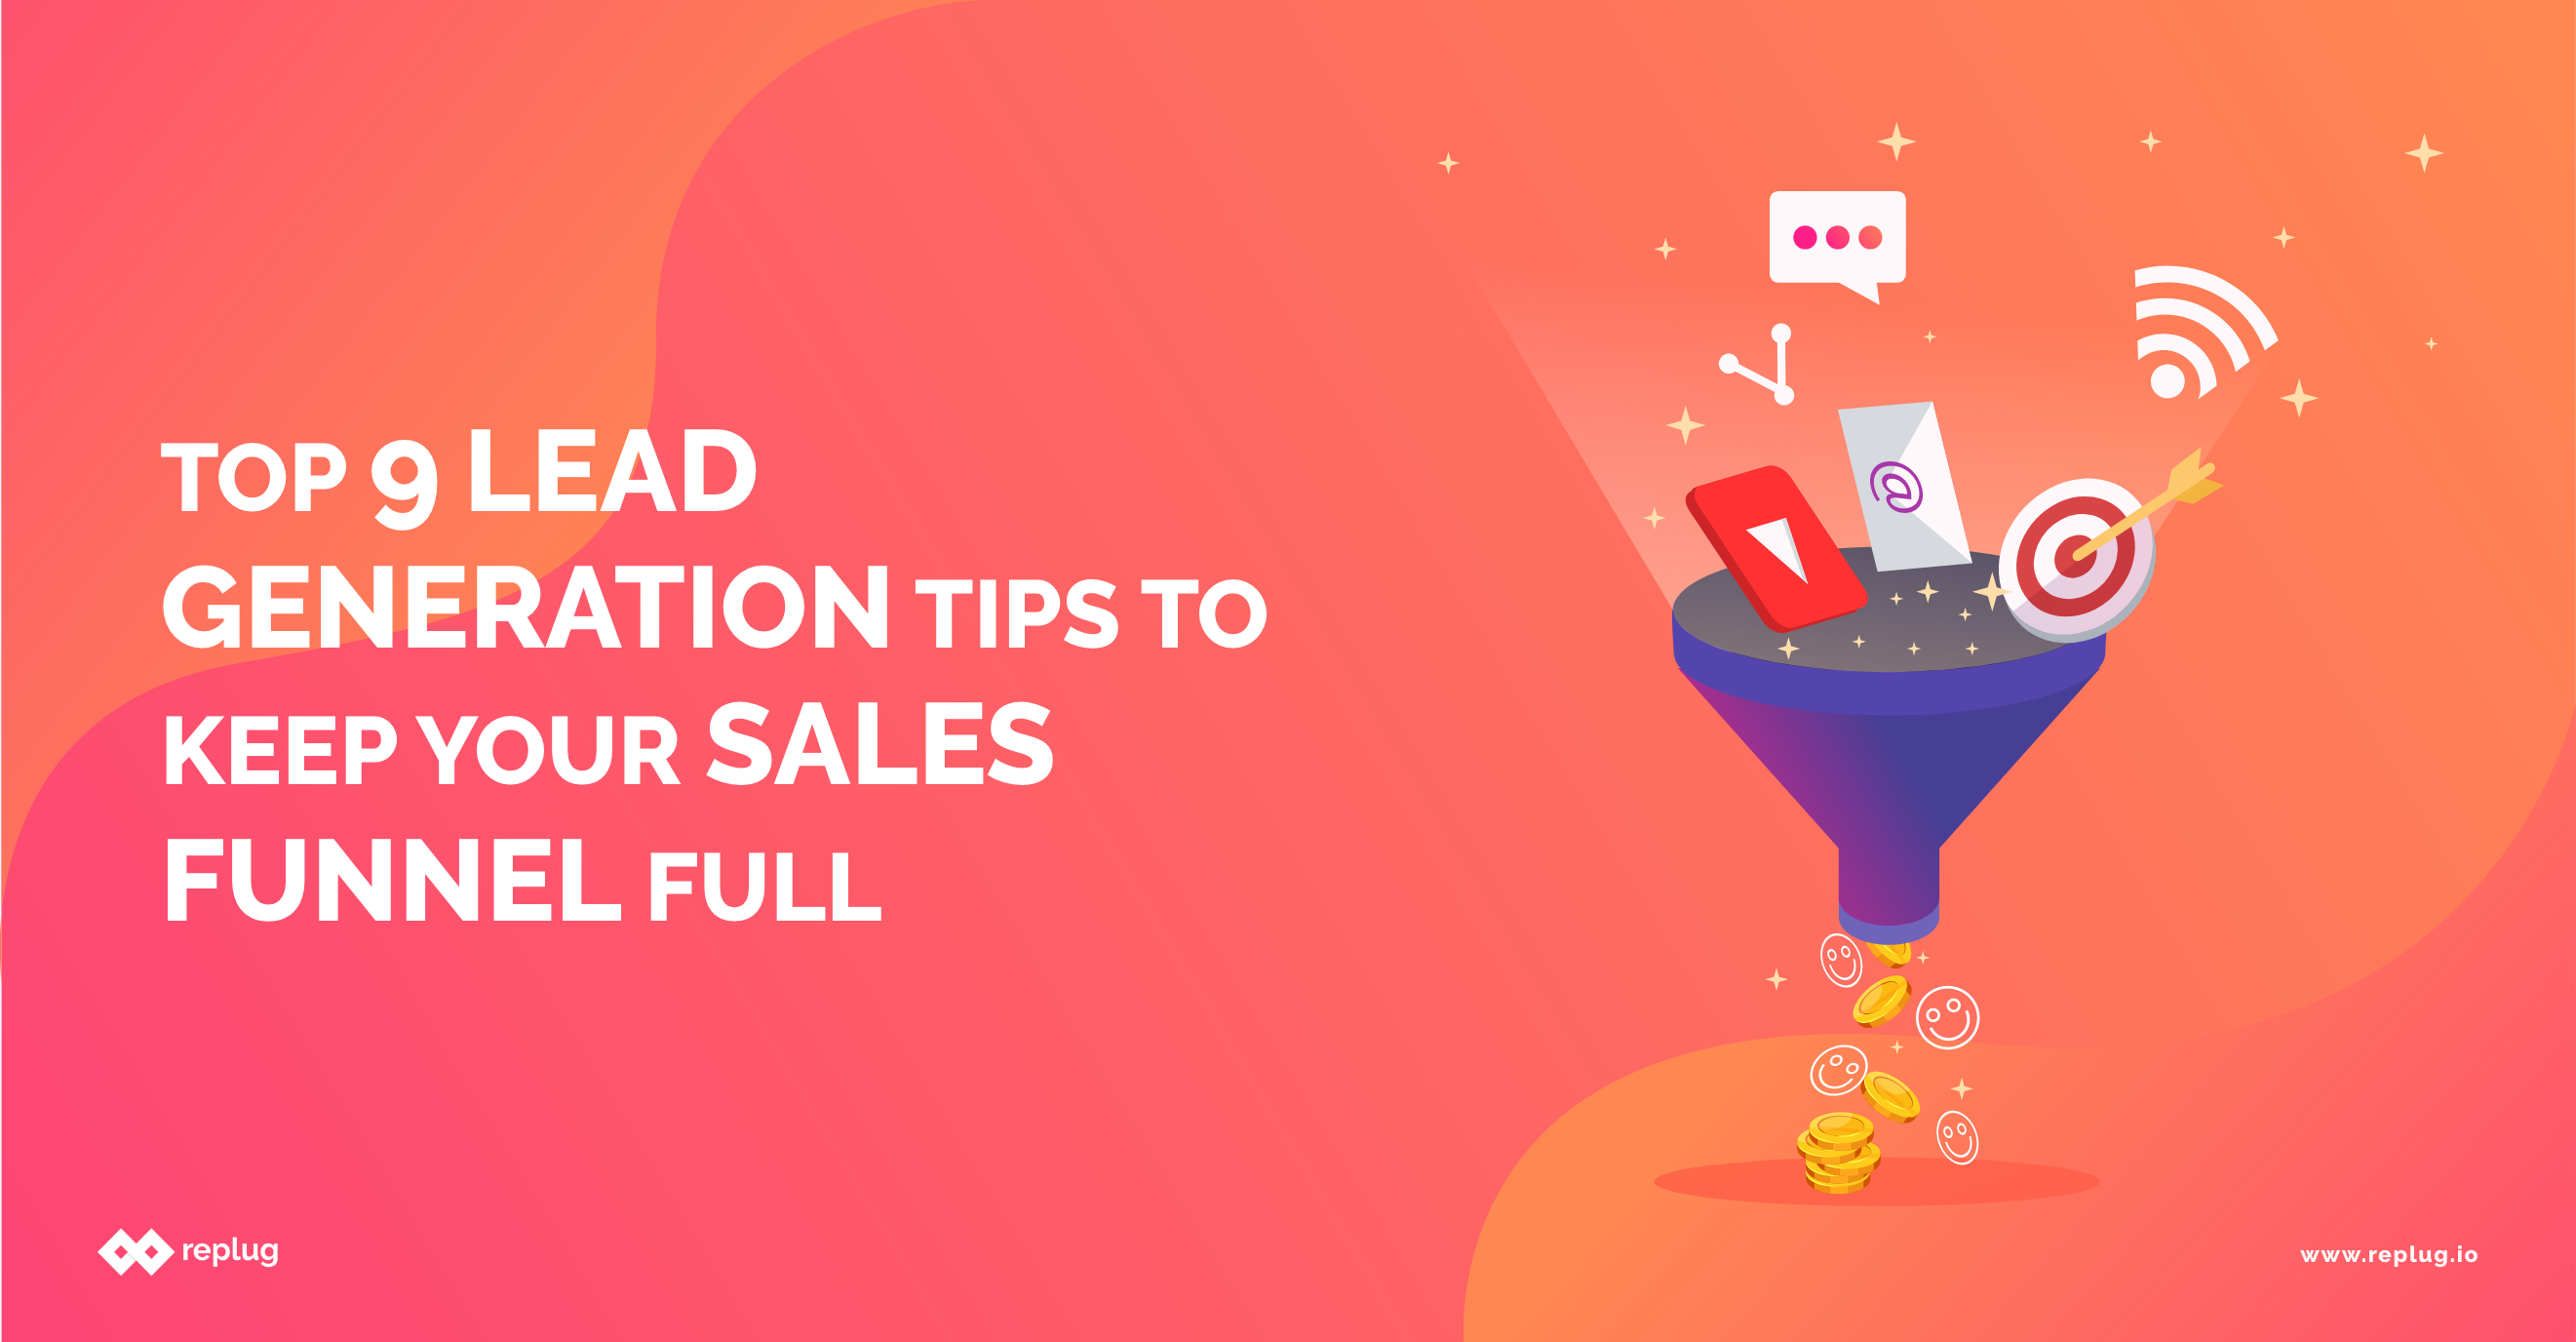 Top 9 Lead Generation Tips To Keep Your Sales Funnel Full